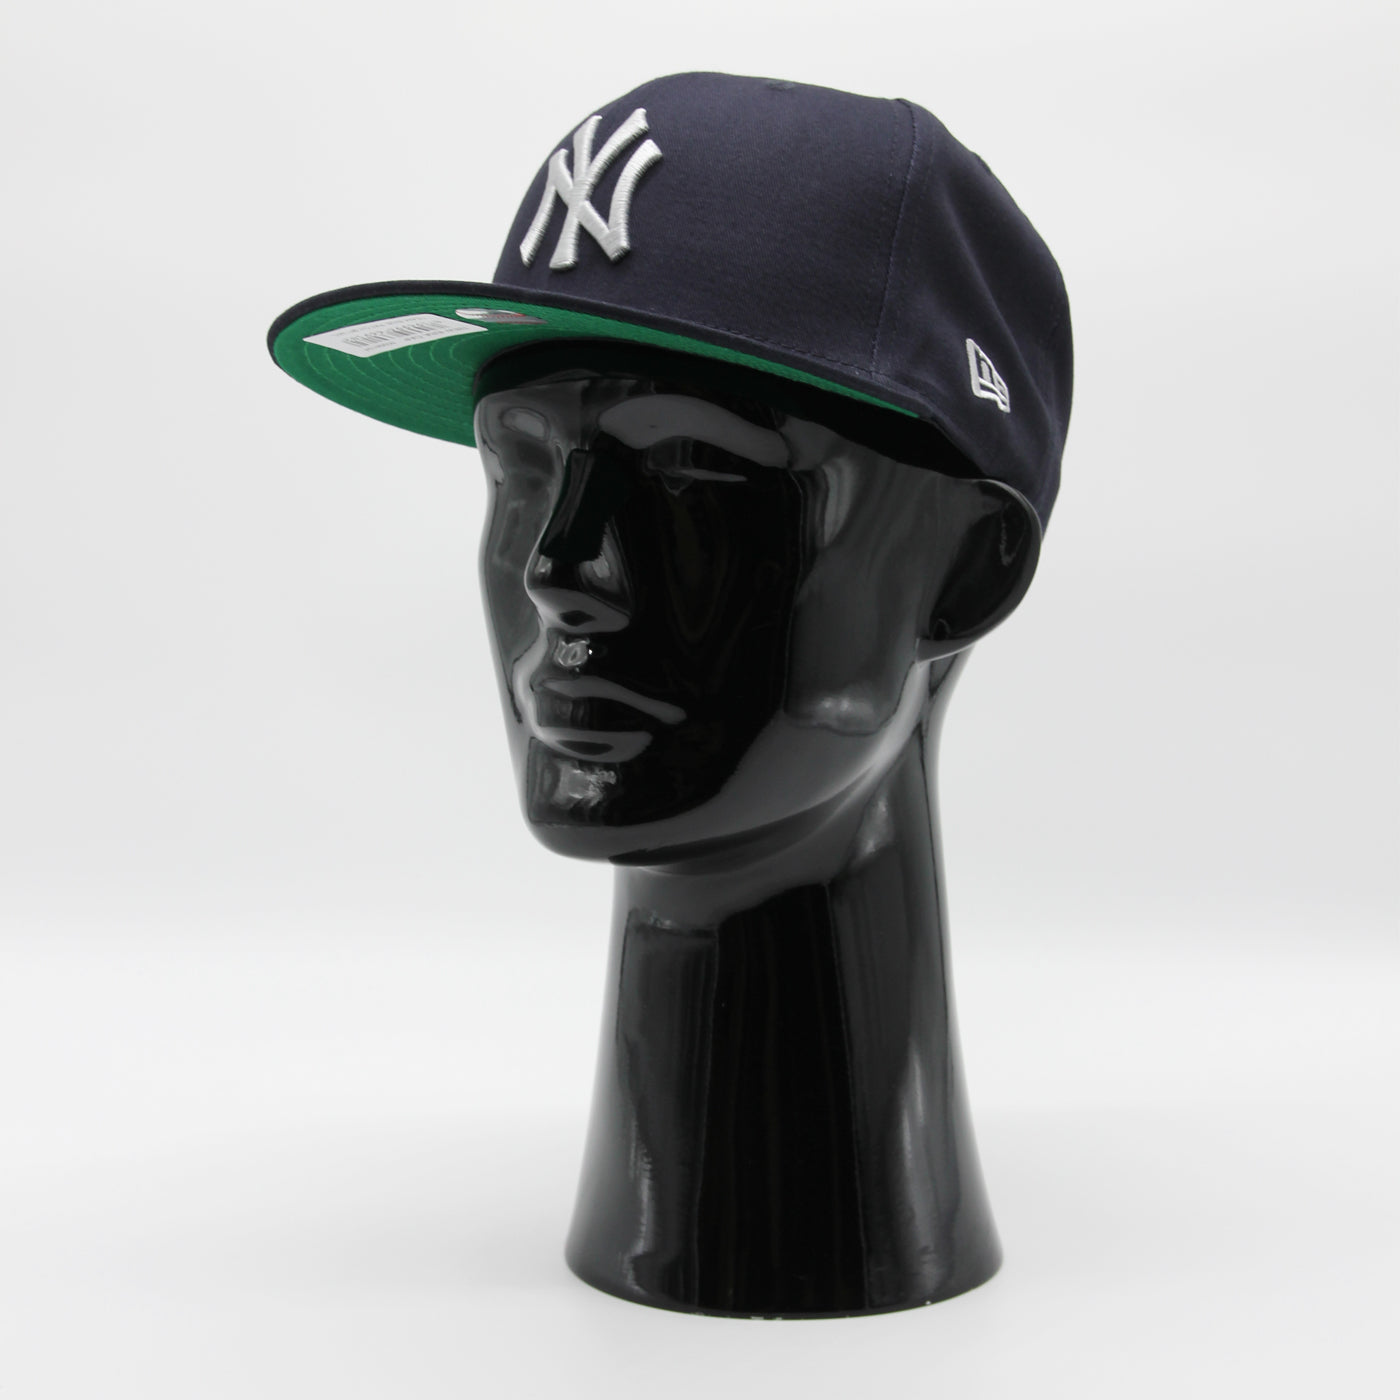 New Era Team Side Patch 9Fifty NY Yankees navy